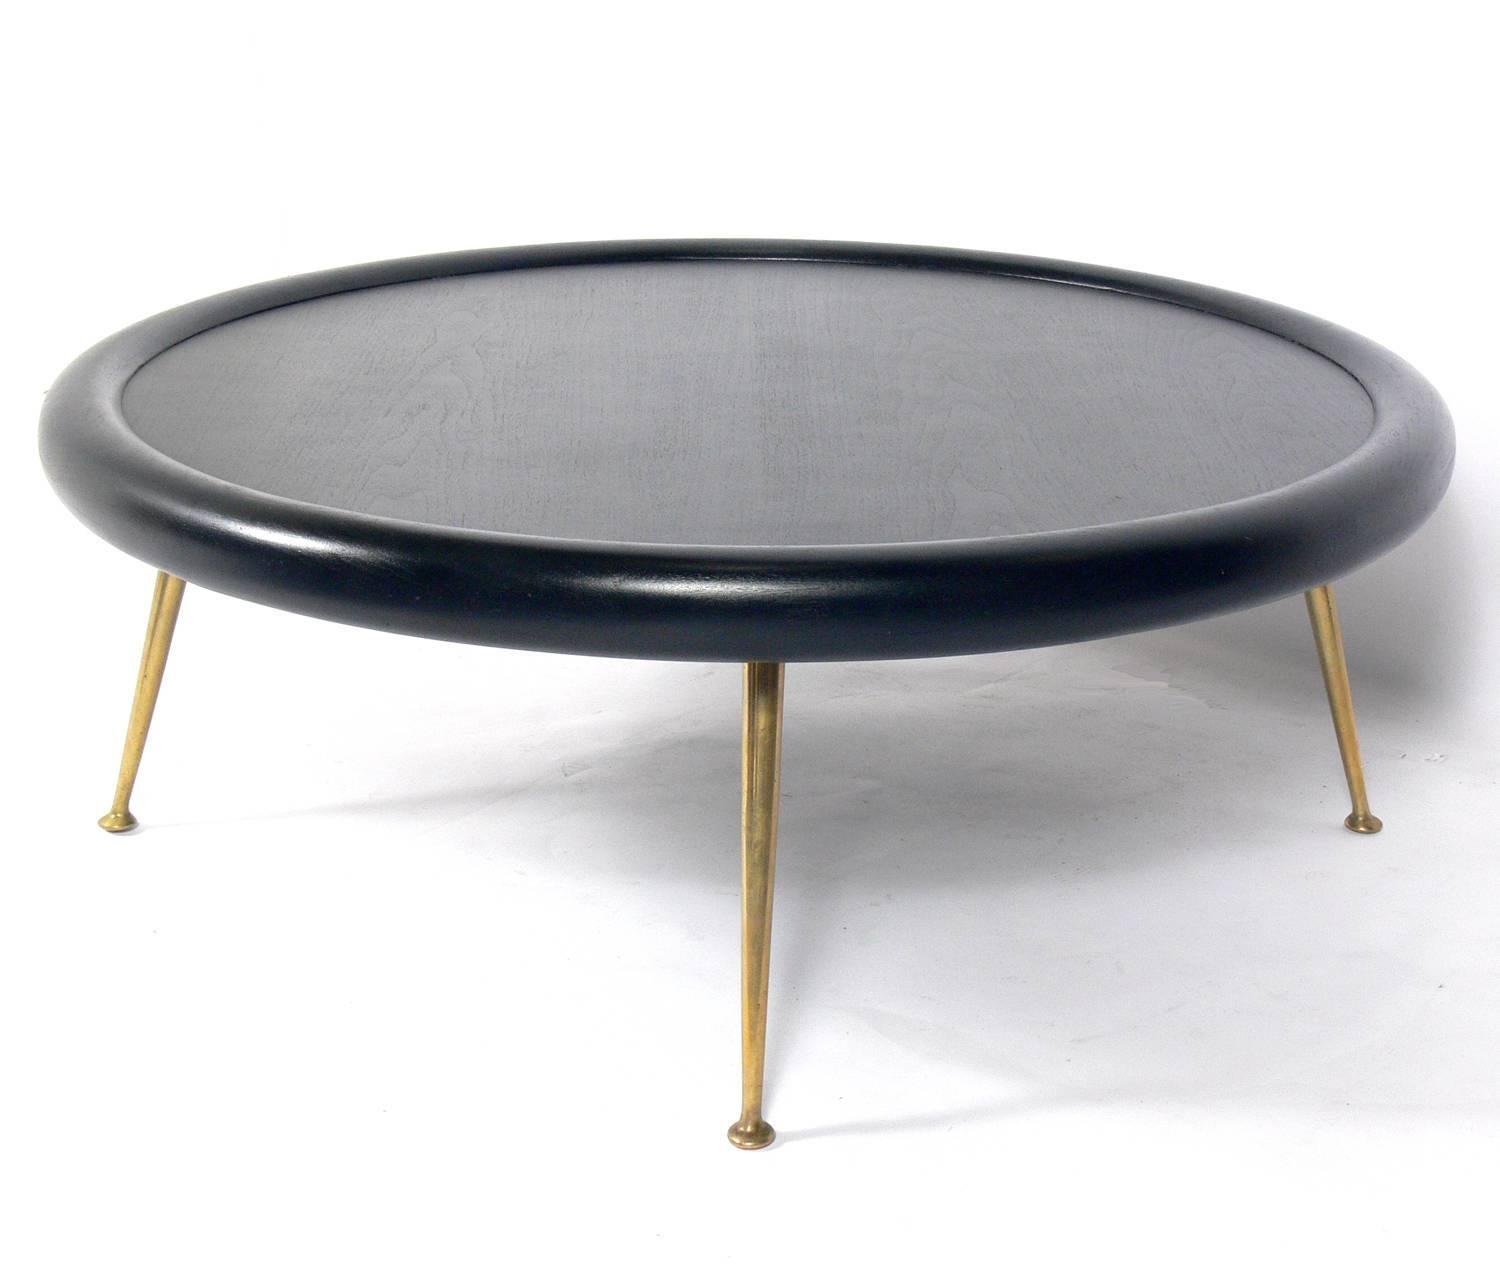 Circular coffee table, designed by T.H. Robsjohn Gibbings for Widdicomb, American, circa 1950s. It has been refinished in a black lacquer. The brass legs retain their warm original patina.